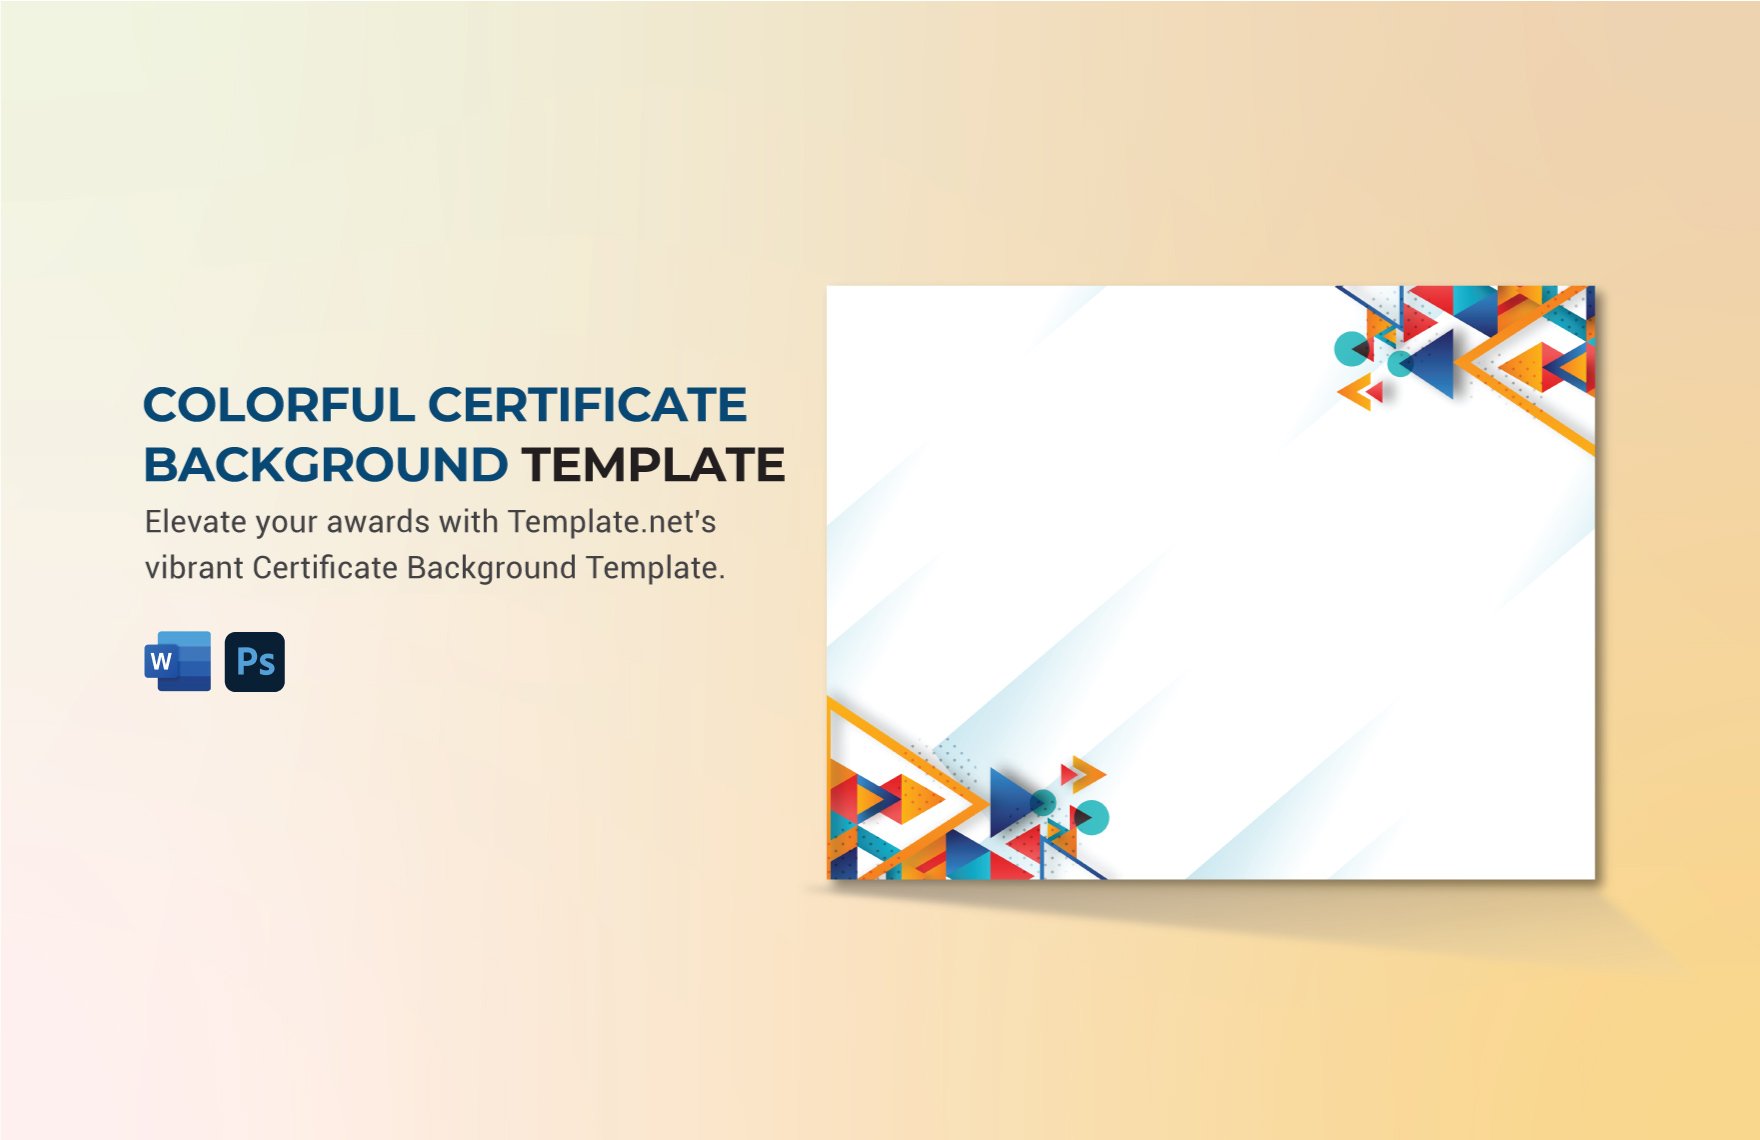 Free Colorful Certificate Background Template in Word, PSD